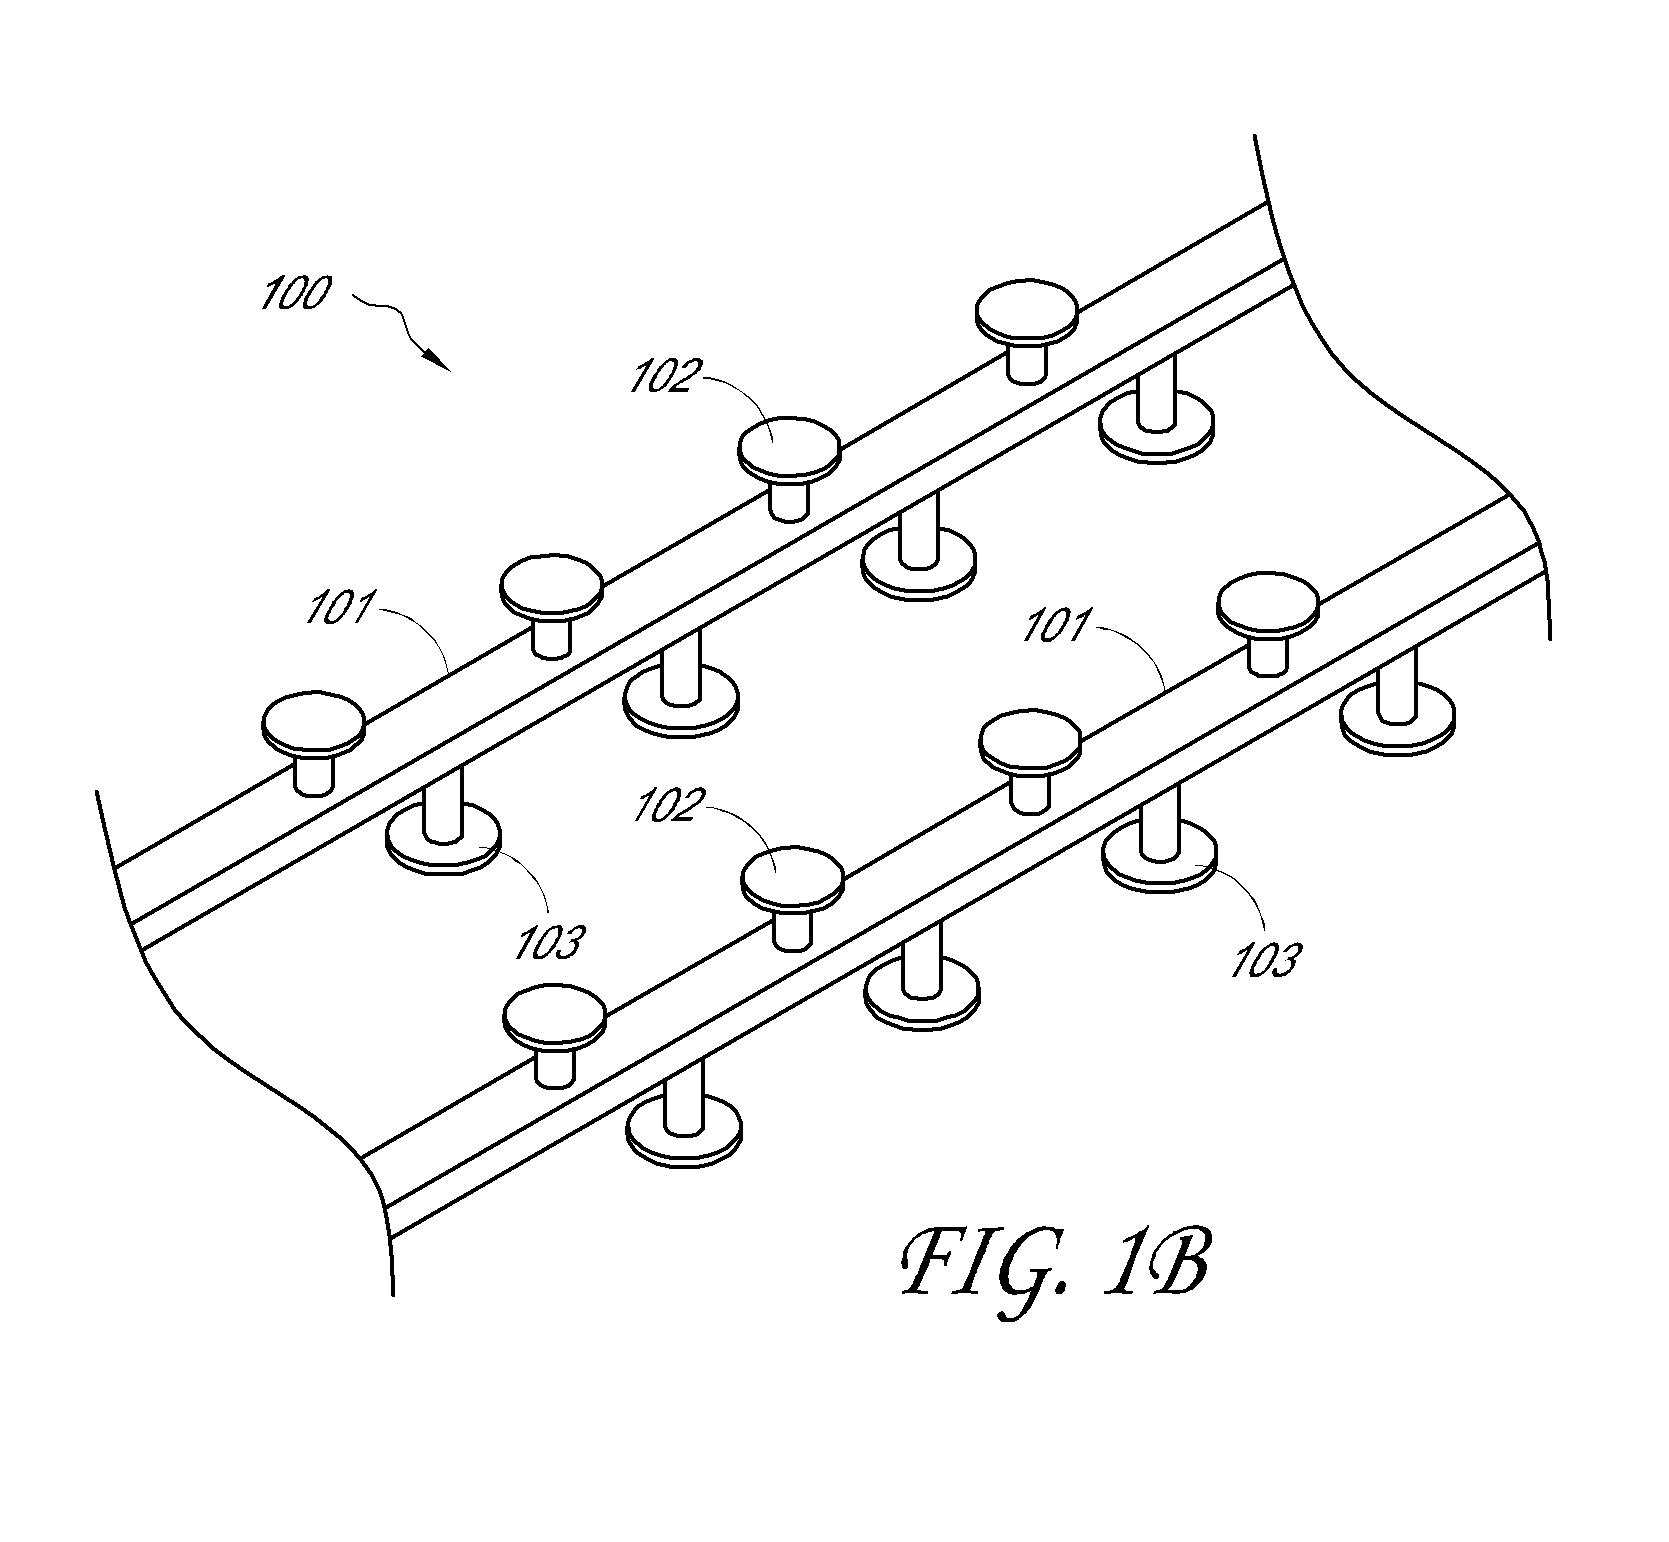 Roof vent for supporting a solar panel